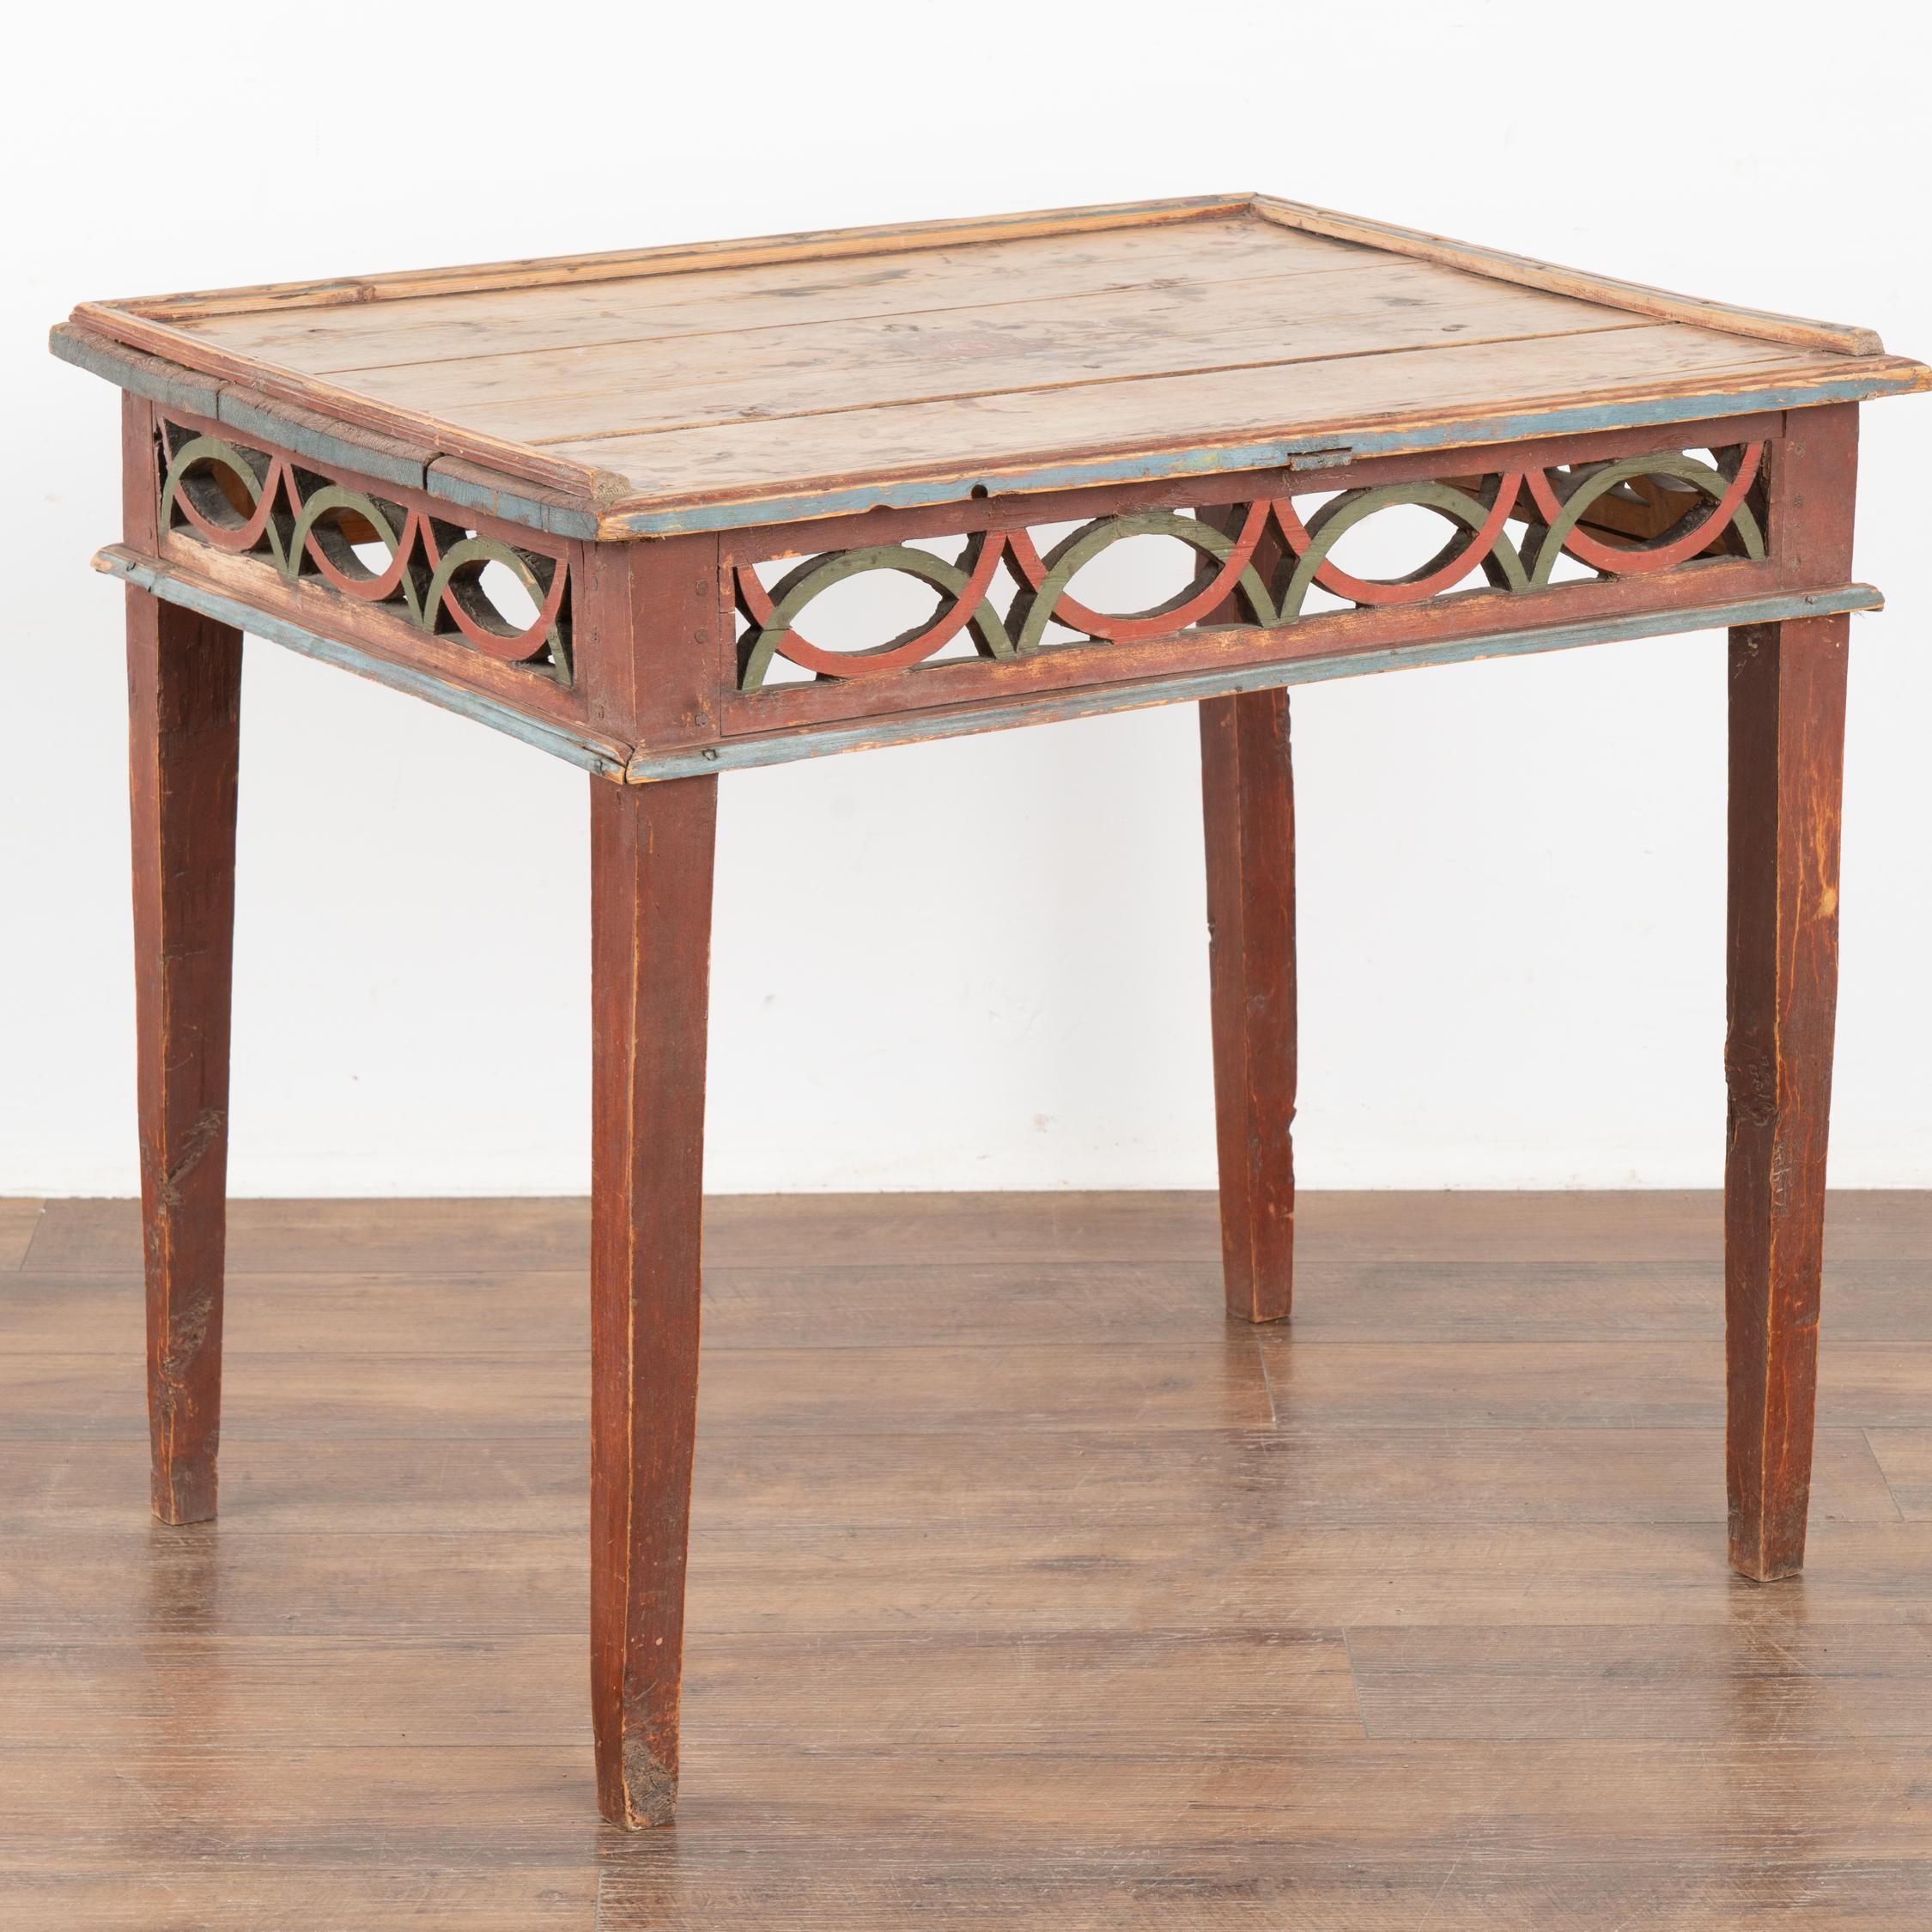 The paint is all original on this pine side table with tapered legs from Sweden. The decorative carved/lattice skirt (along all 4 sides) in red and green compliment the brick red base with blue trim.
While the top is natural pine, the residual